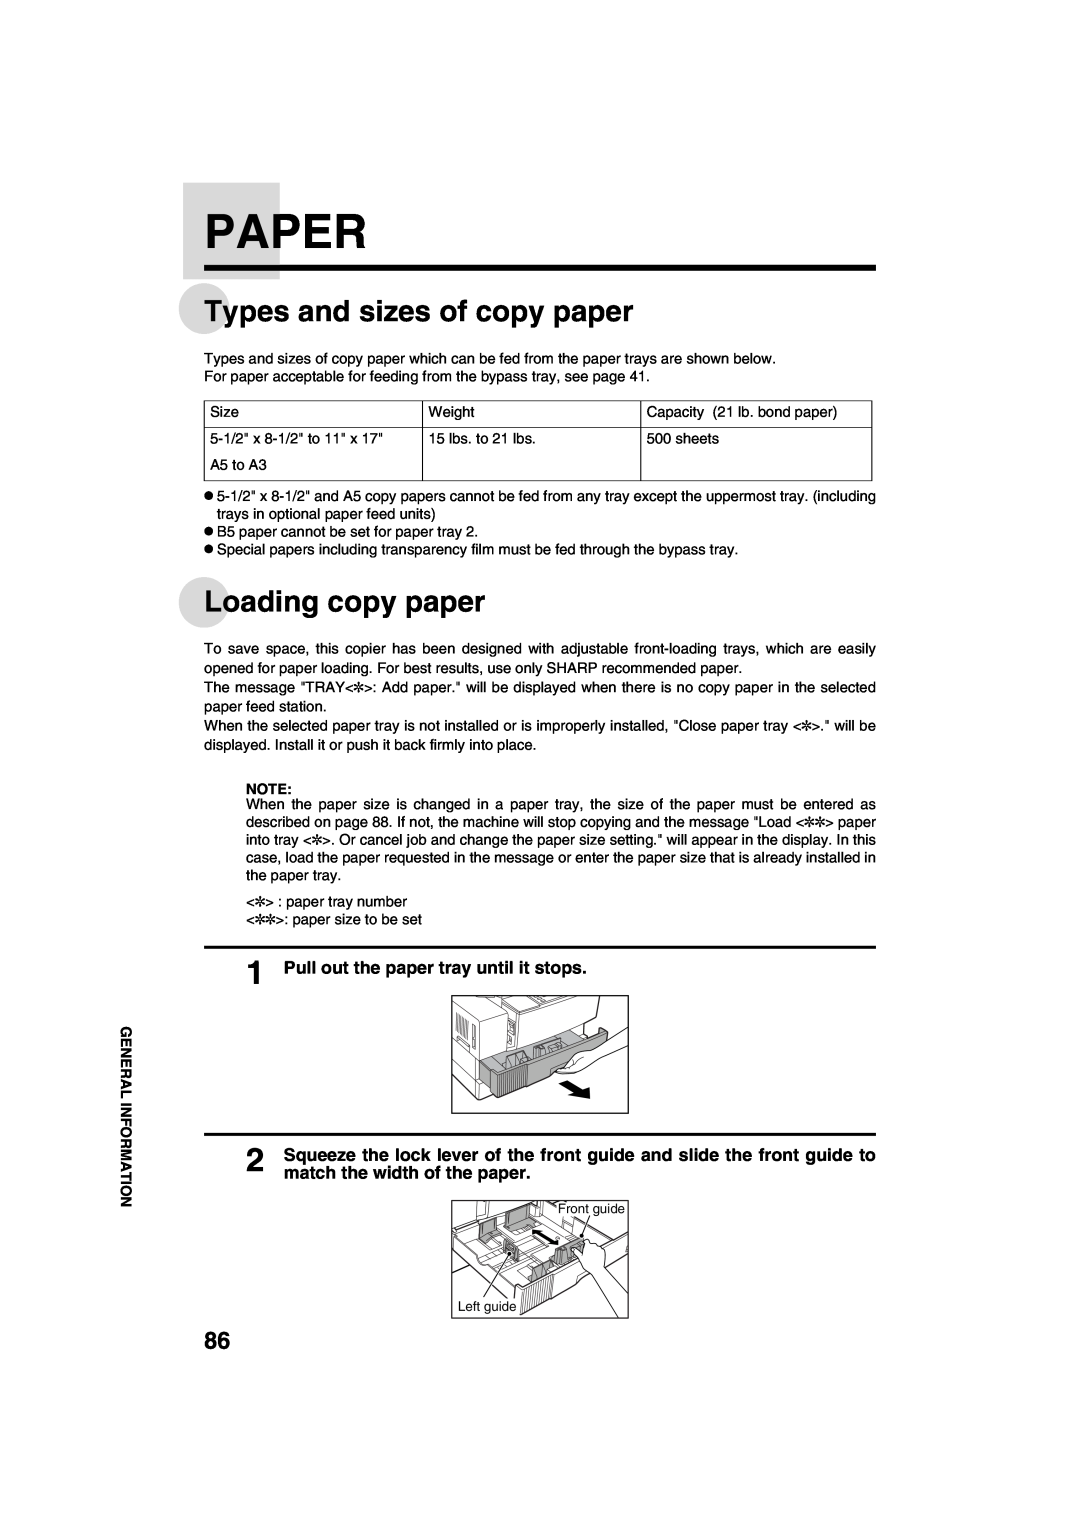 Sharp AR-M208 Paper, Types and sizes of copy paper, Loading copy paper, Pull out the paper tray until it stops 